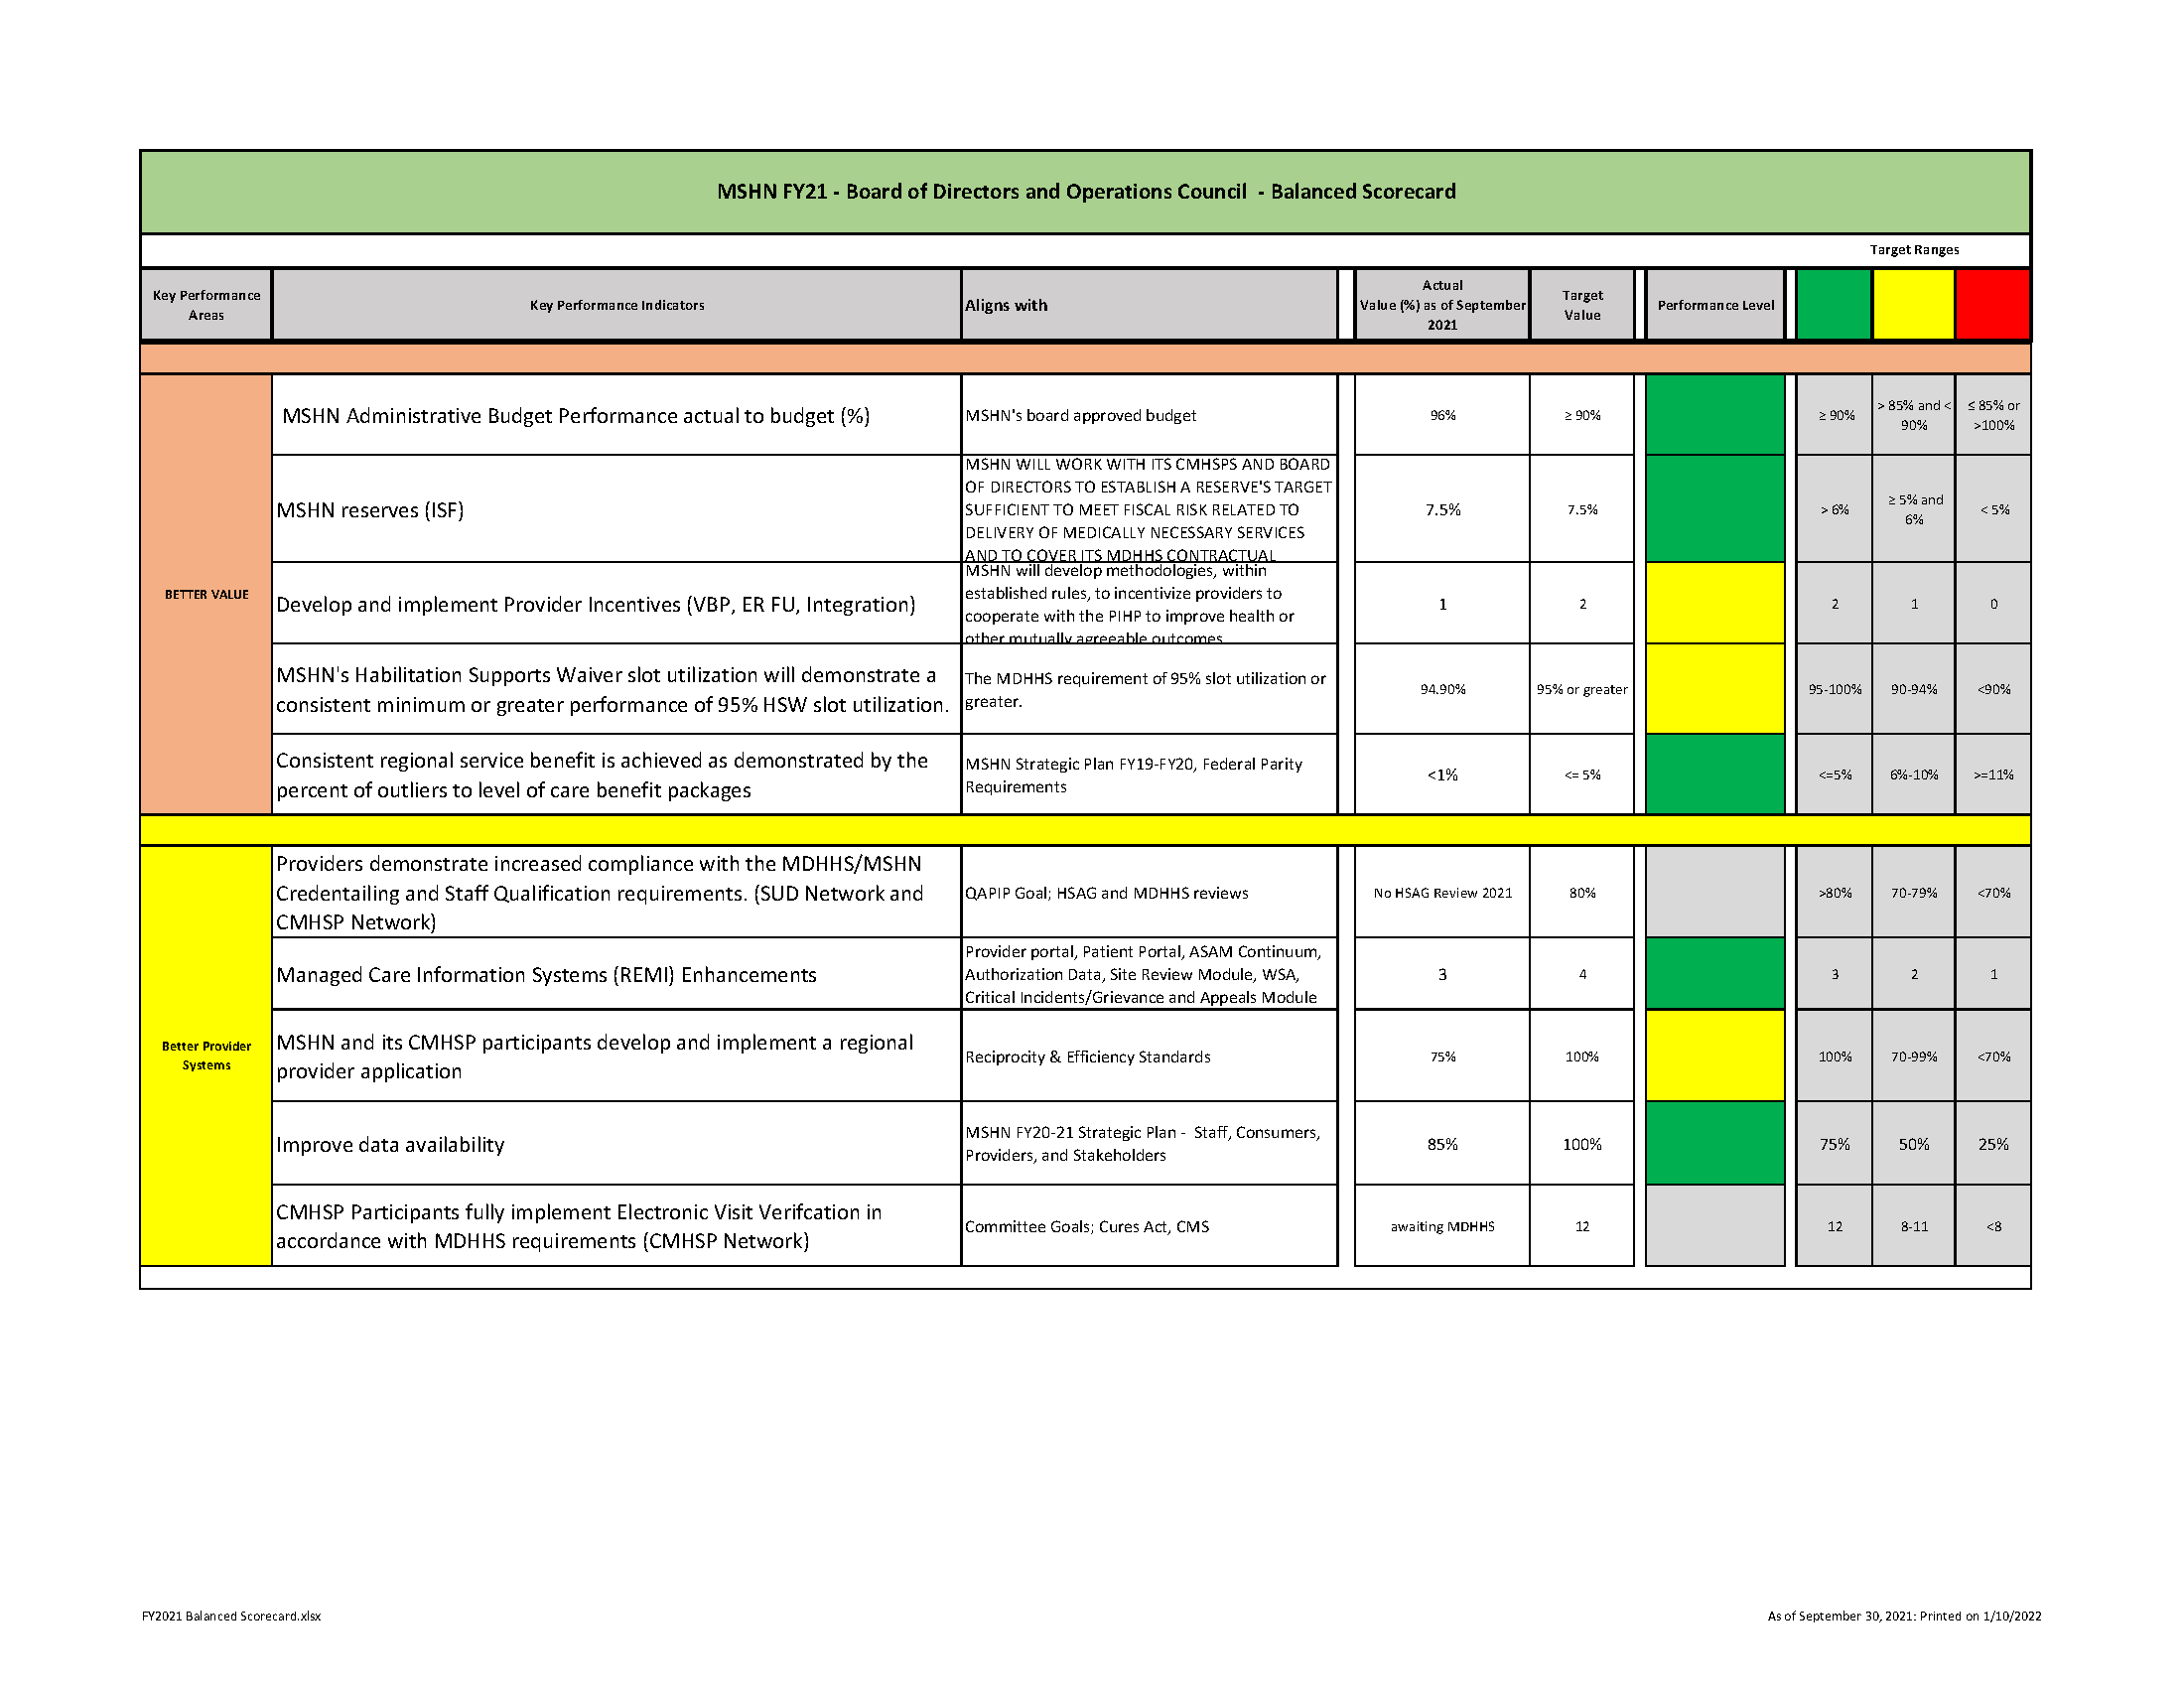 The Board of Directors Balanced Scorecard includes measures related to the Strategic Plan and overall agency performance.

Scores are reflective of the providers that received full reviews in the year identified.  MSHN conducts full reviews for SUD providers over a two-year period due to the size of the network. 